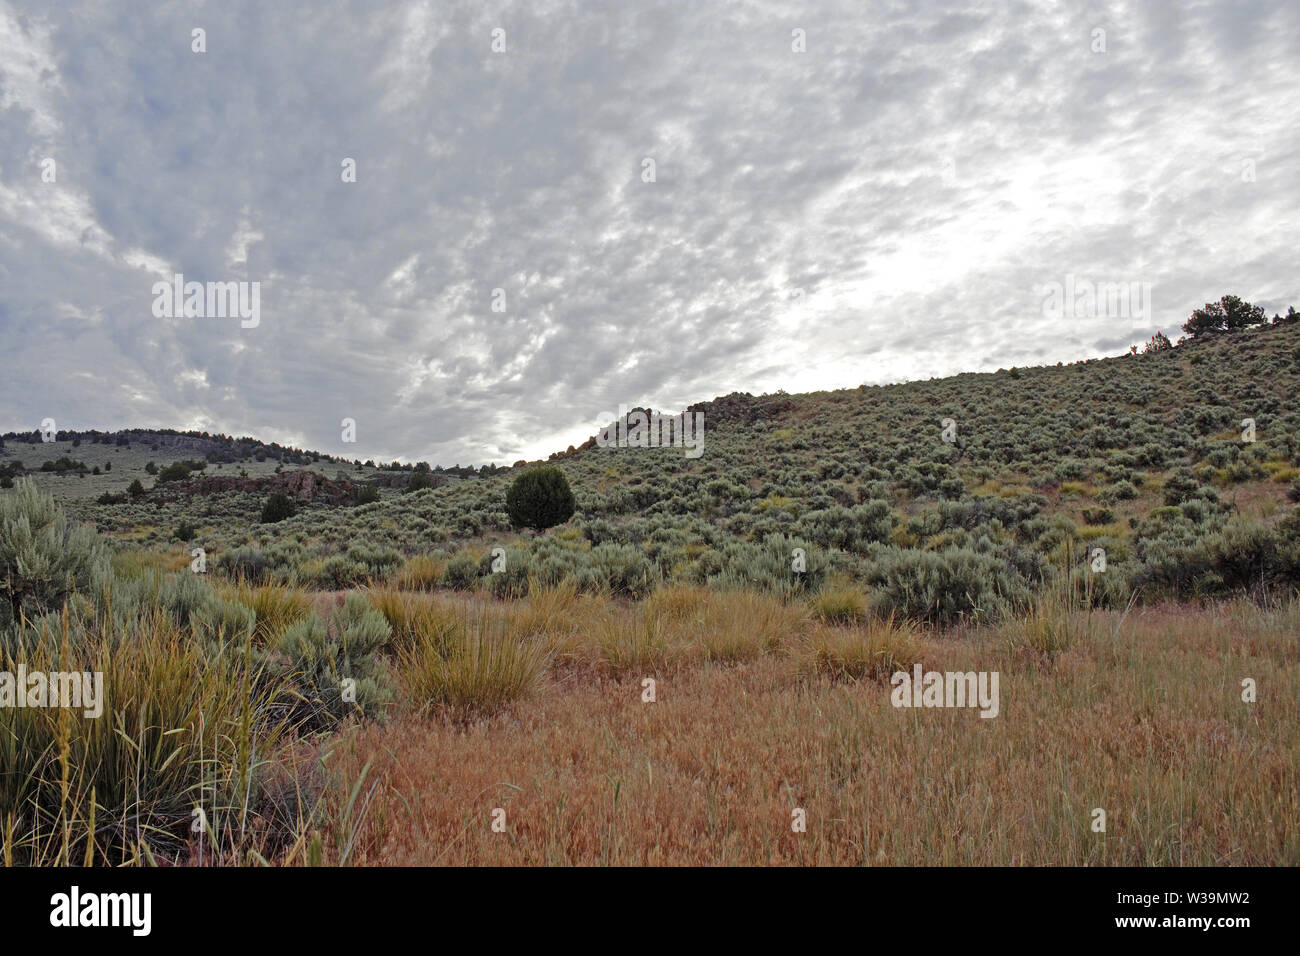 The Eastern Oregon desert is mostly sage brush with an occasional patch of grass. Stock Photo